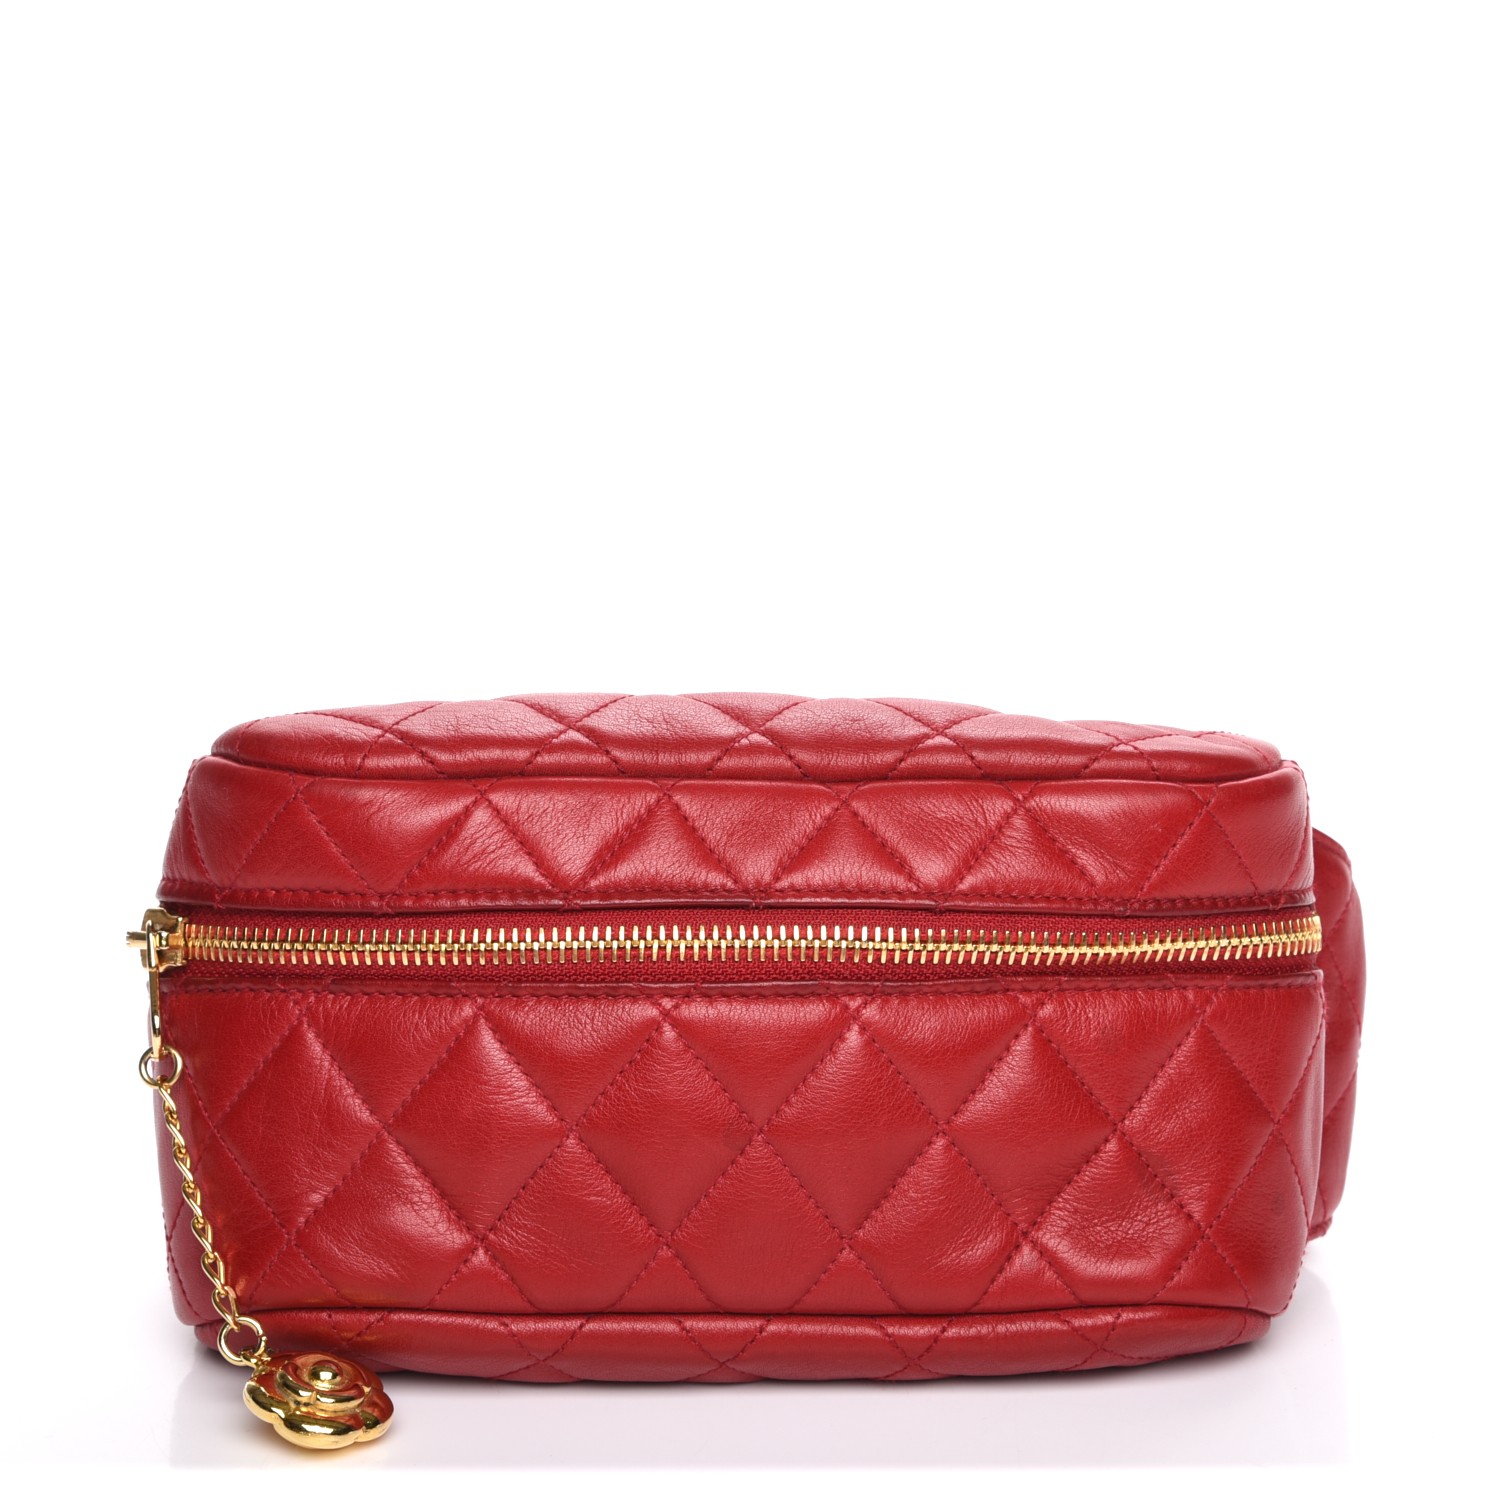 CHANEL Lambskin Quilted Belt Bag Red 215356